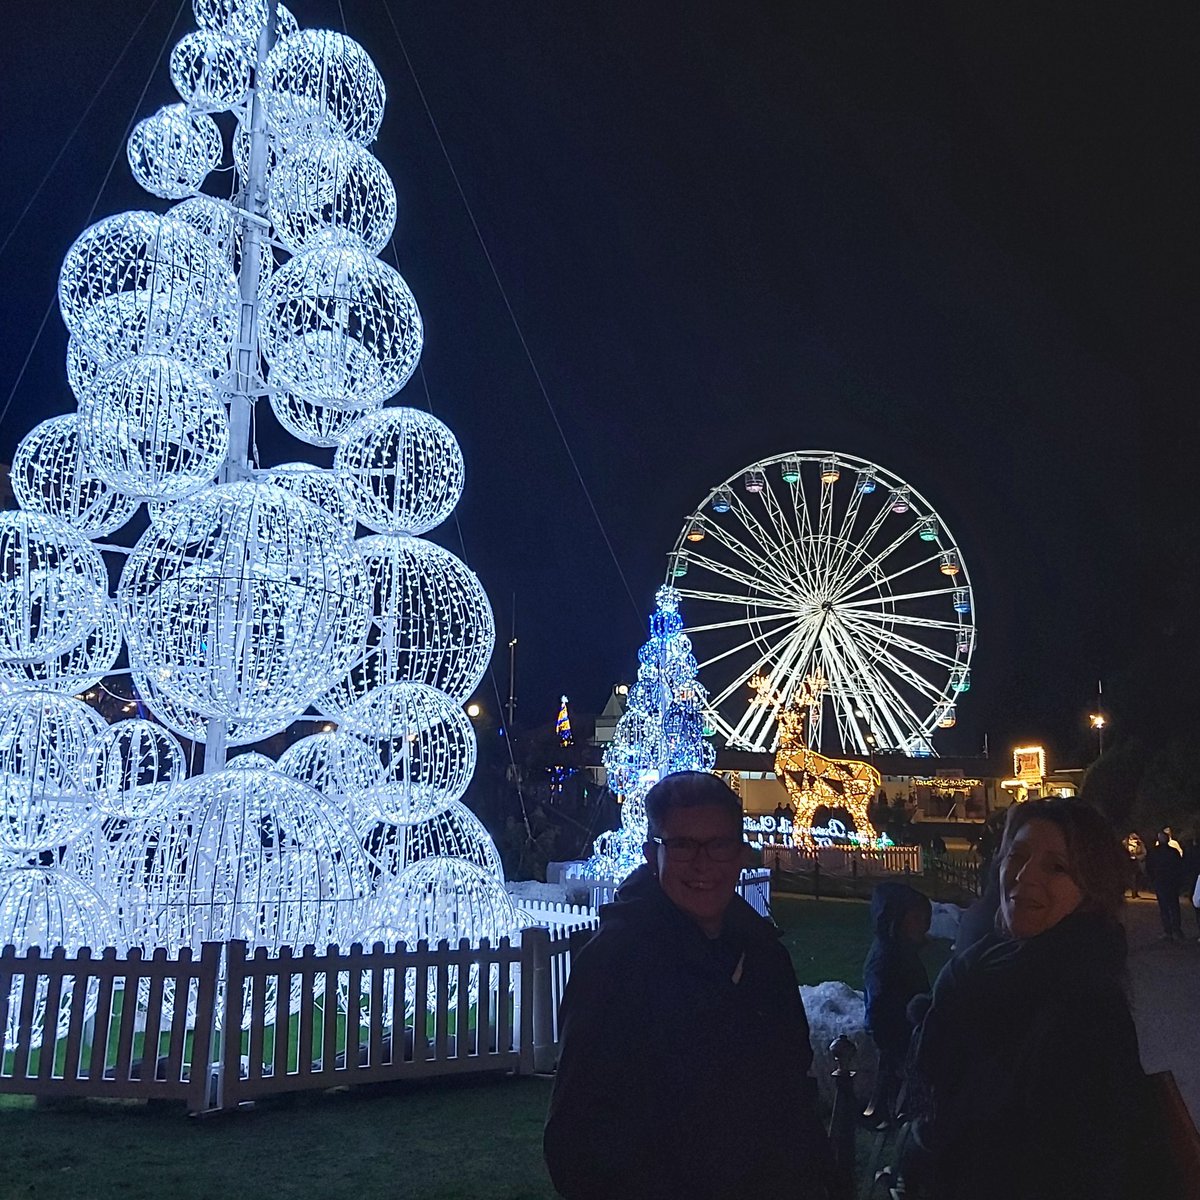 Welcoming our external examiner @ThewMiranda to Bournemouth Christmas tree wonderland. Looking forward to a fabulous Innovations in Occupational Therapy conference tomorrow with our third year students. #BUProud @hss_bu